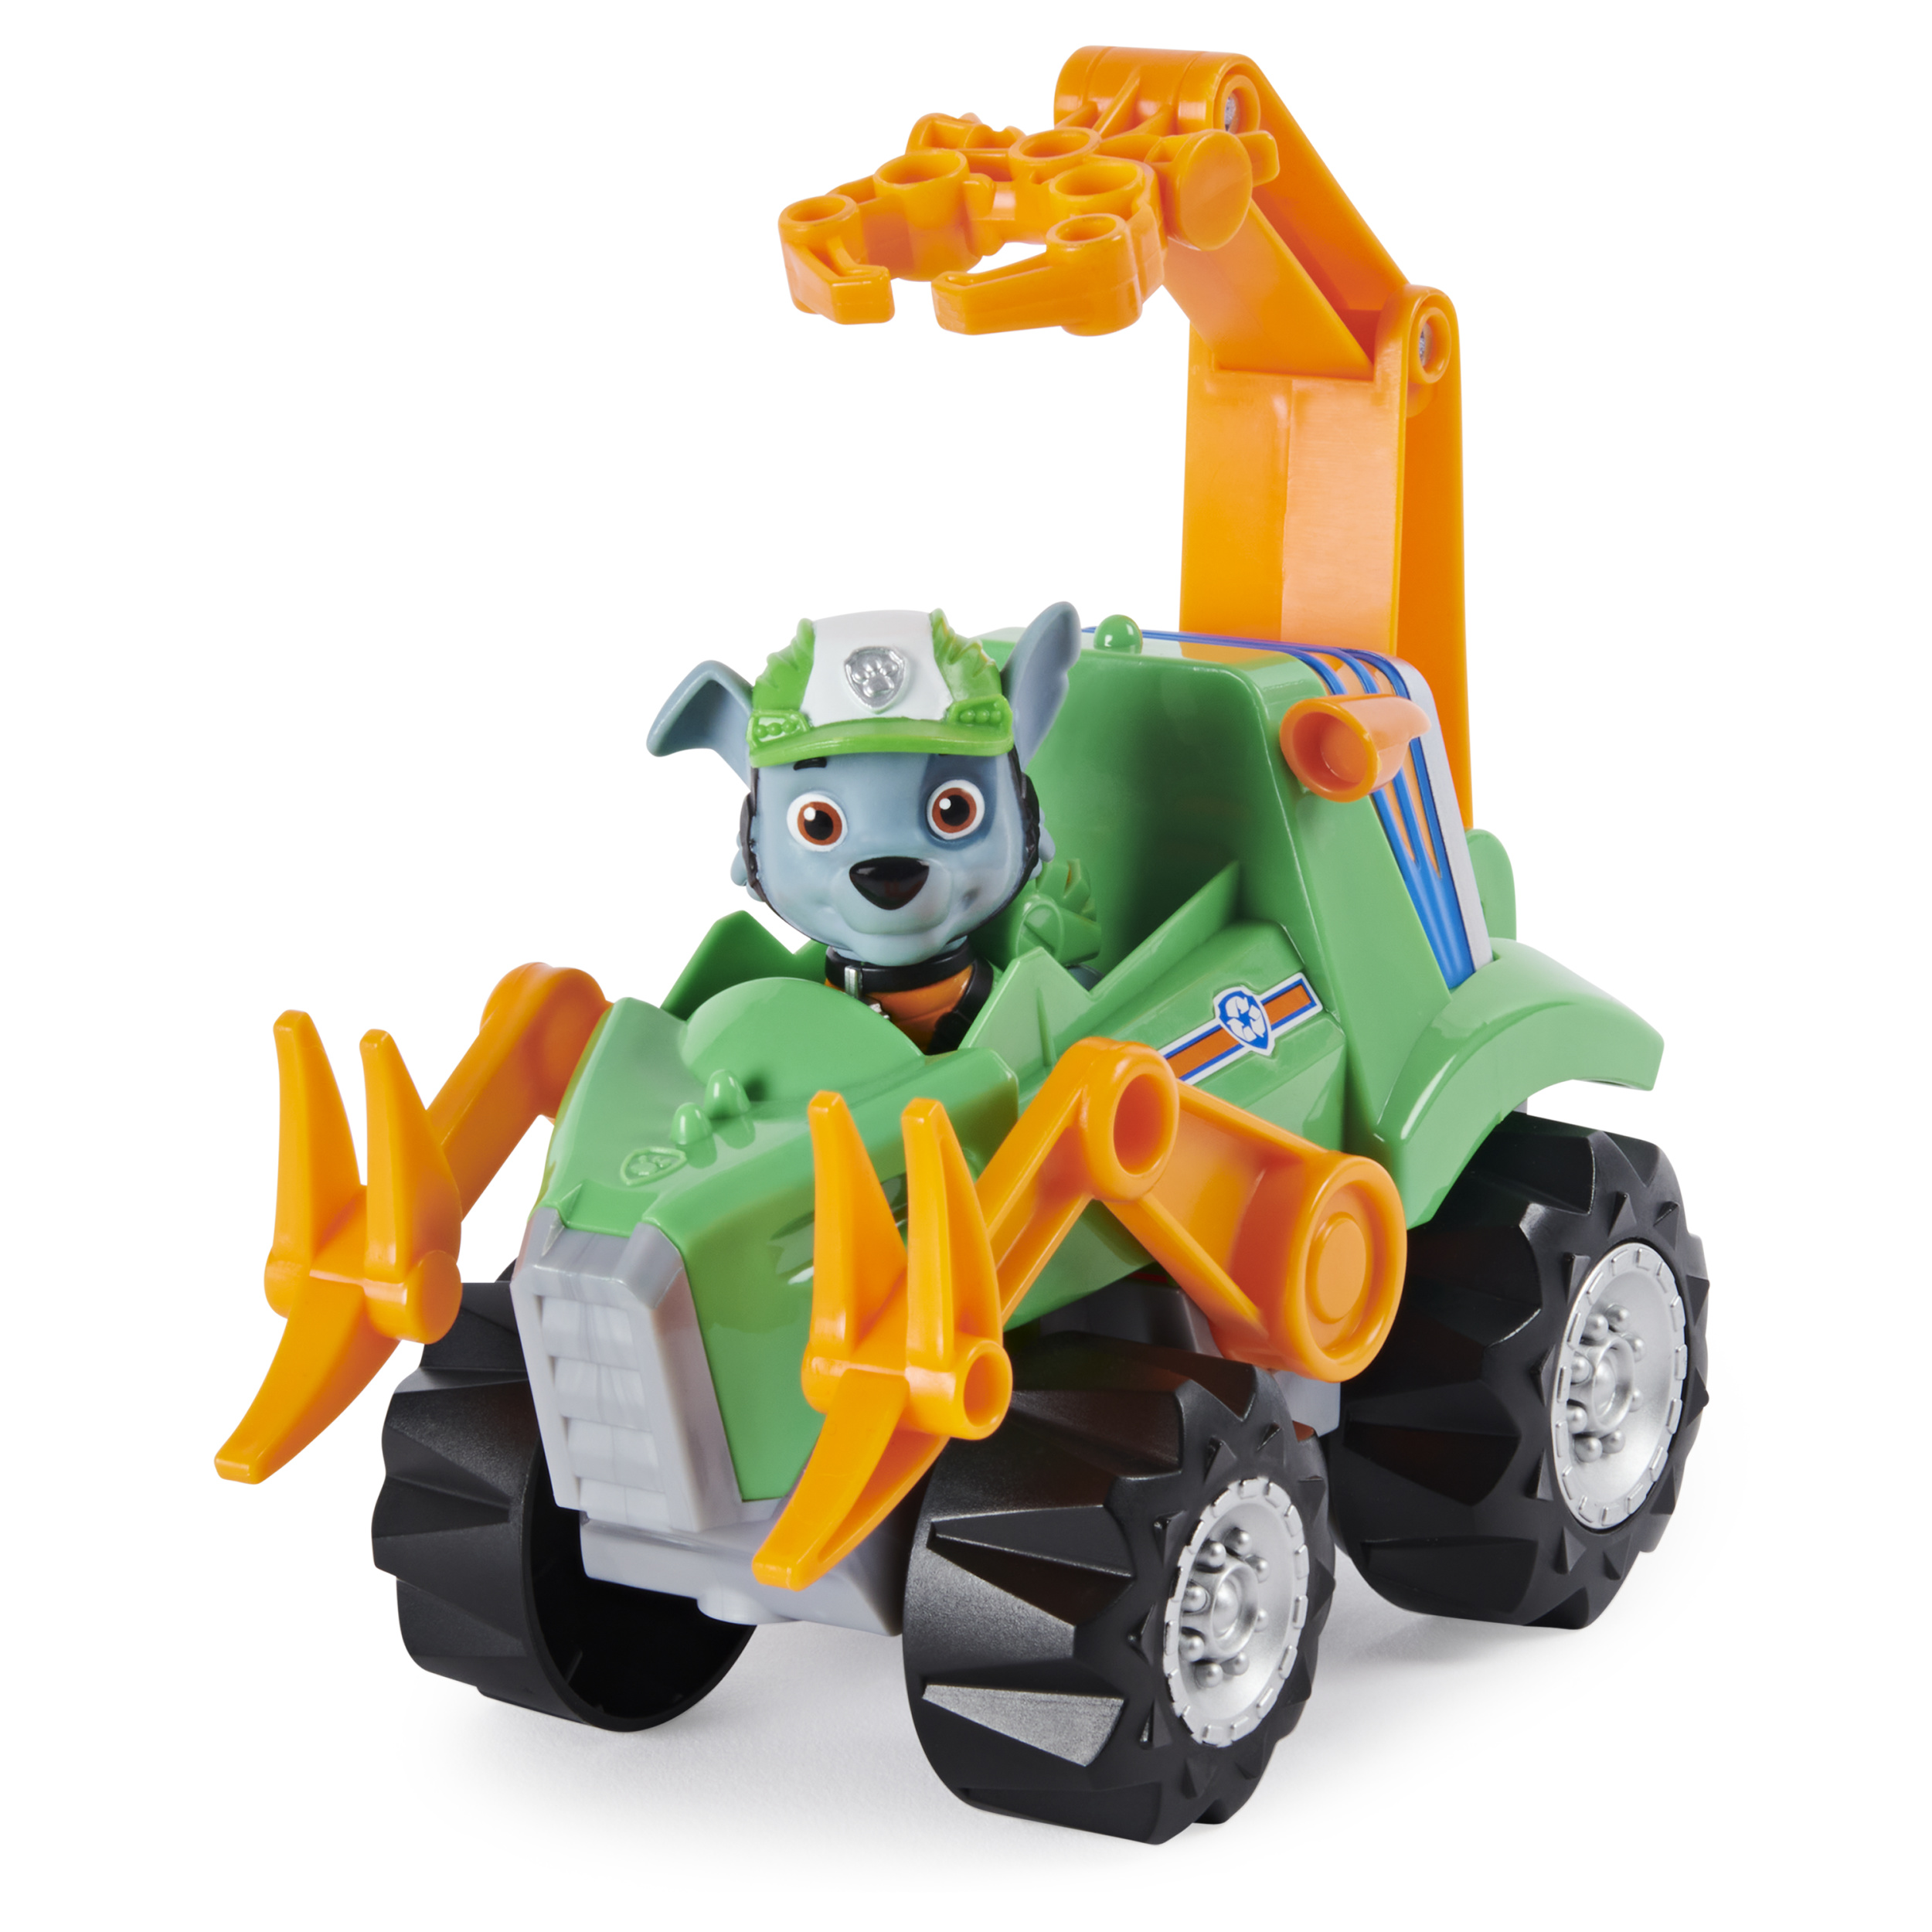 Paw Patrol Deluxe Dino Vehicles Assortment (Styles May Vary) - image 2 of 6